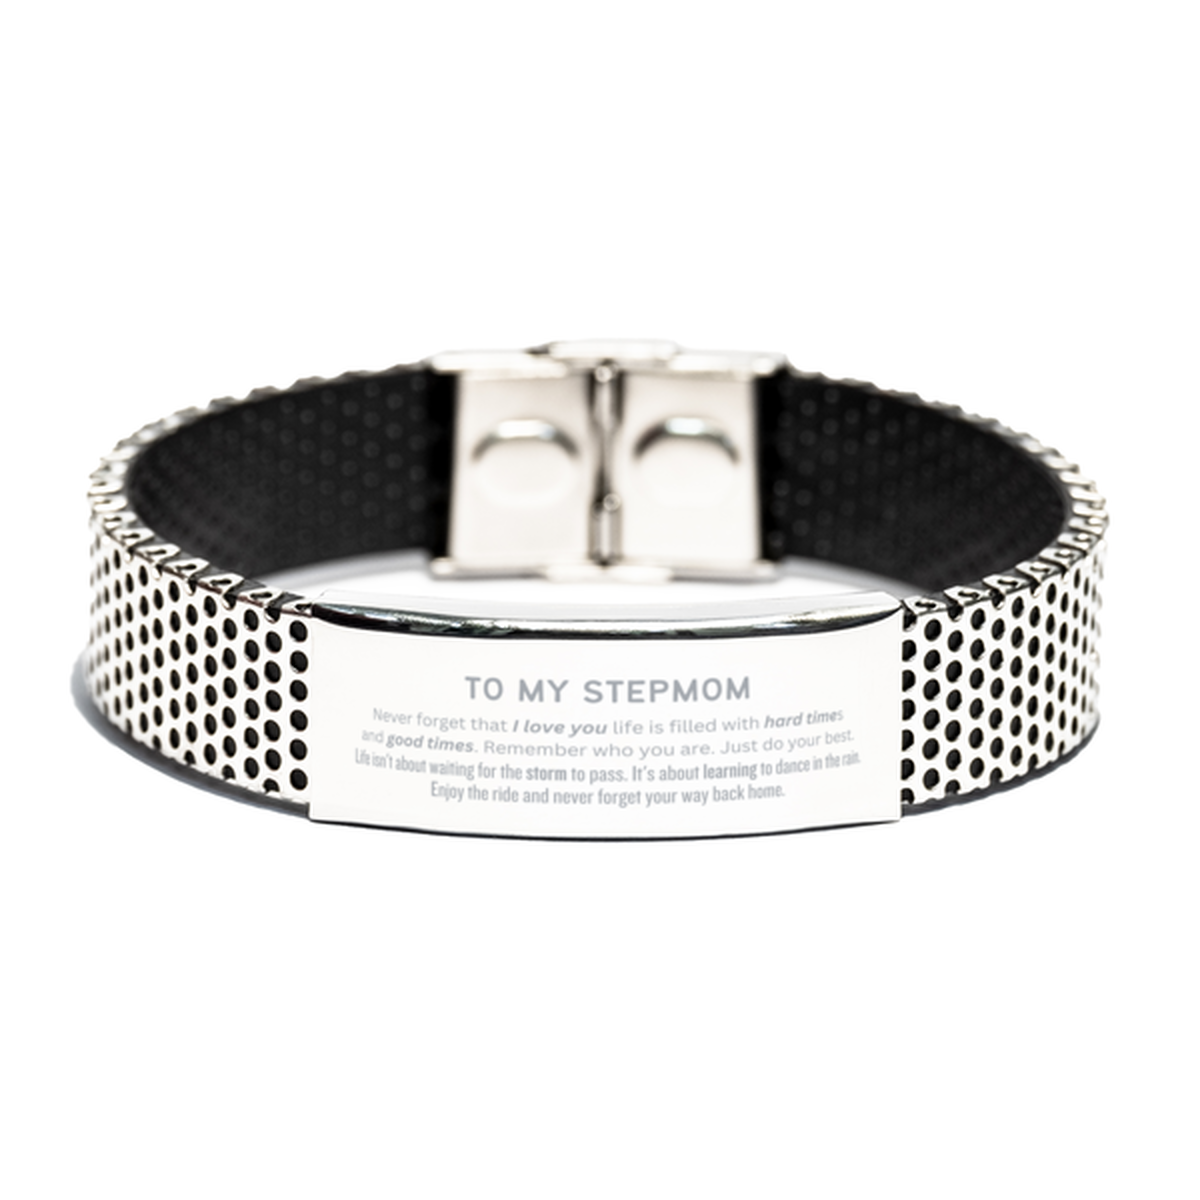 Christmas Stepmom Stainless Steel Bracelet Gifts, To My Stepmom Birthday Thank You Gifts For Stepmom, Graduation Unique Gifts For Stepmom To My Stepmom Never forget that I love you life is filled with hard times and good times. Remember who you are. Just